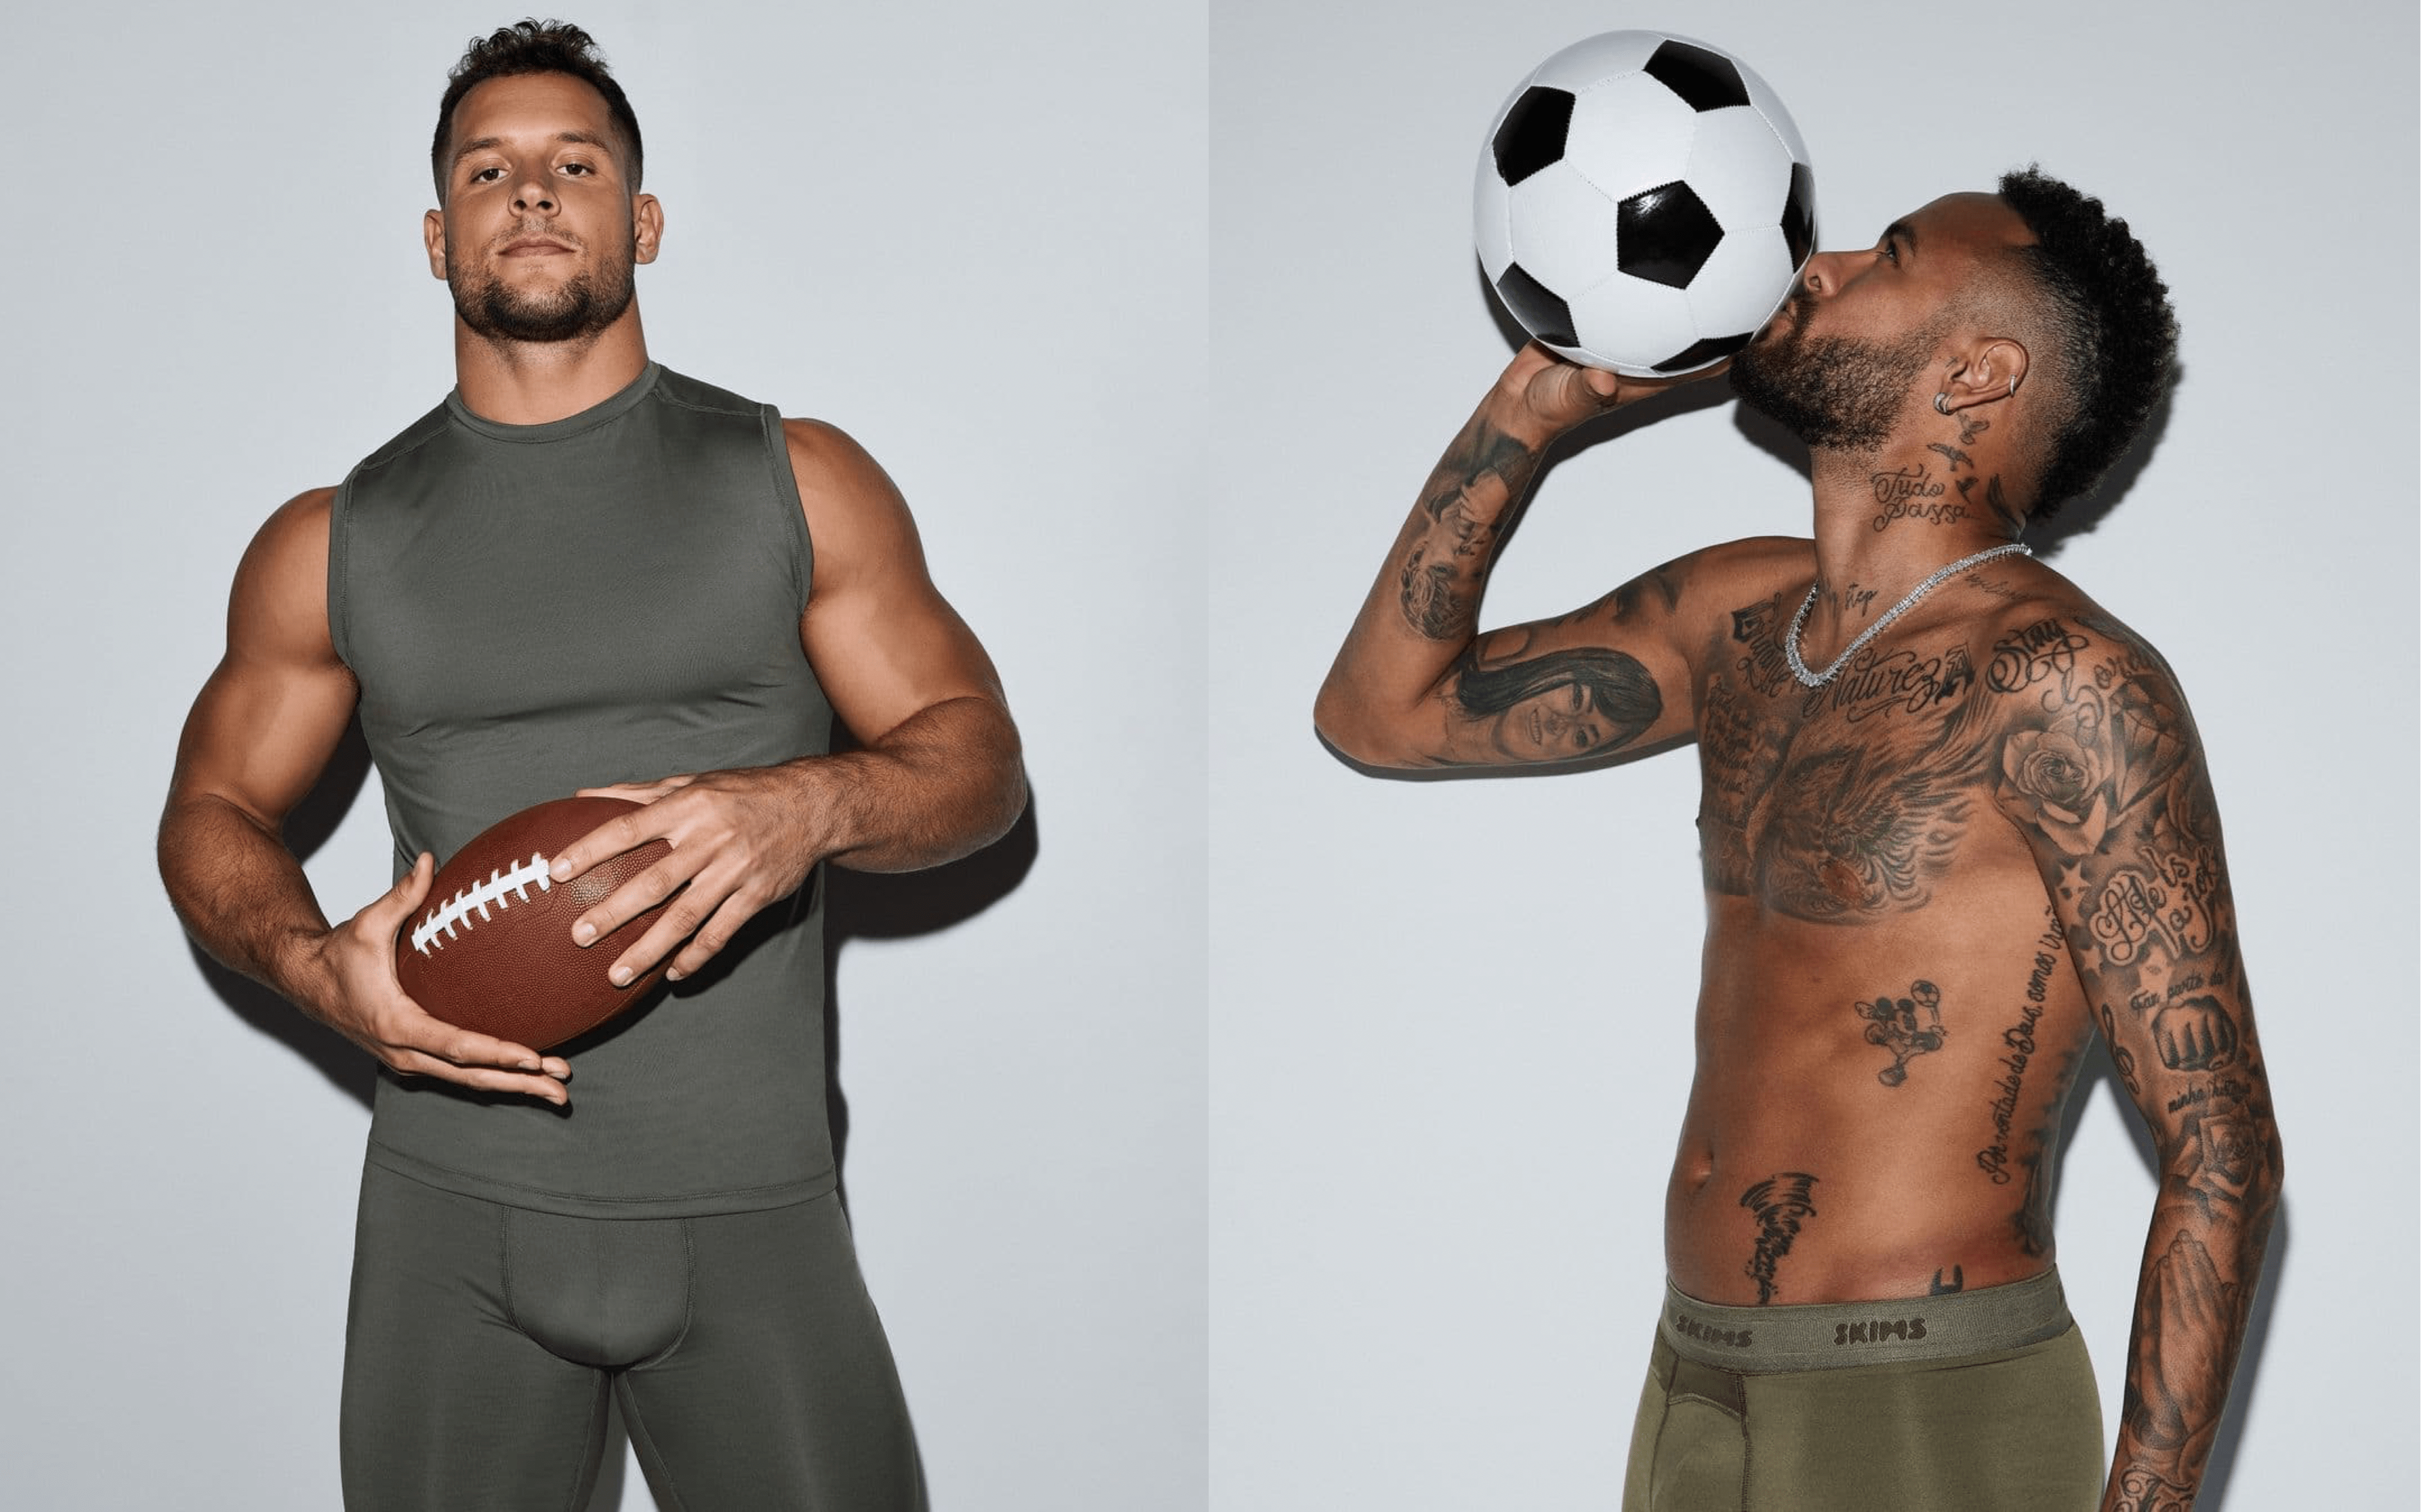 Skims Launches Men's Collection with Star-Studded Athlete Campaign